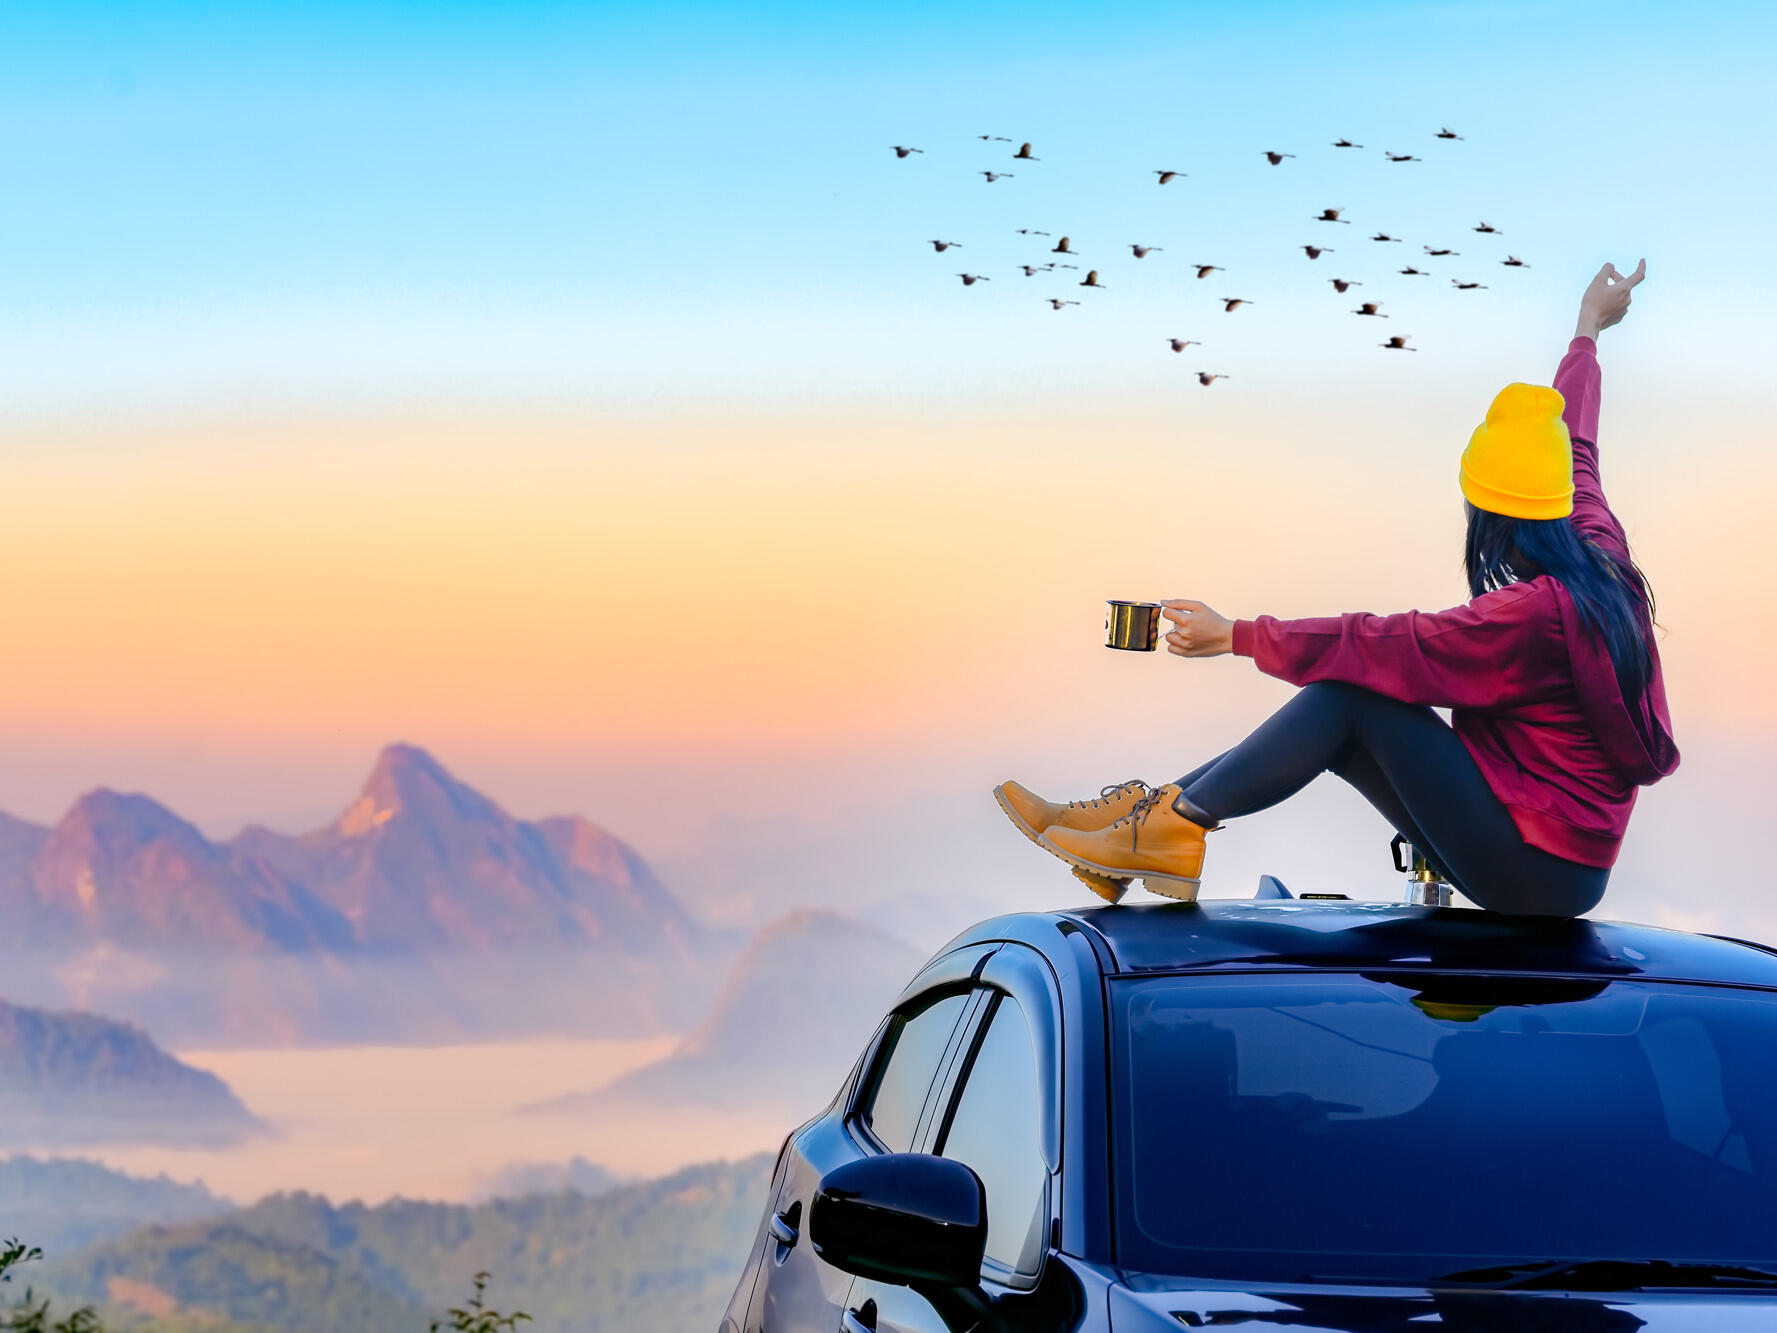 A lady sitting on a roof of a car enjoying the the view while drinking tea/coffee